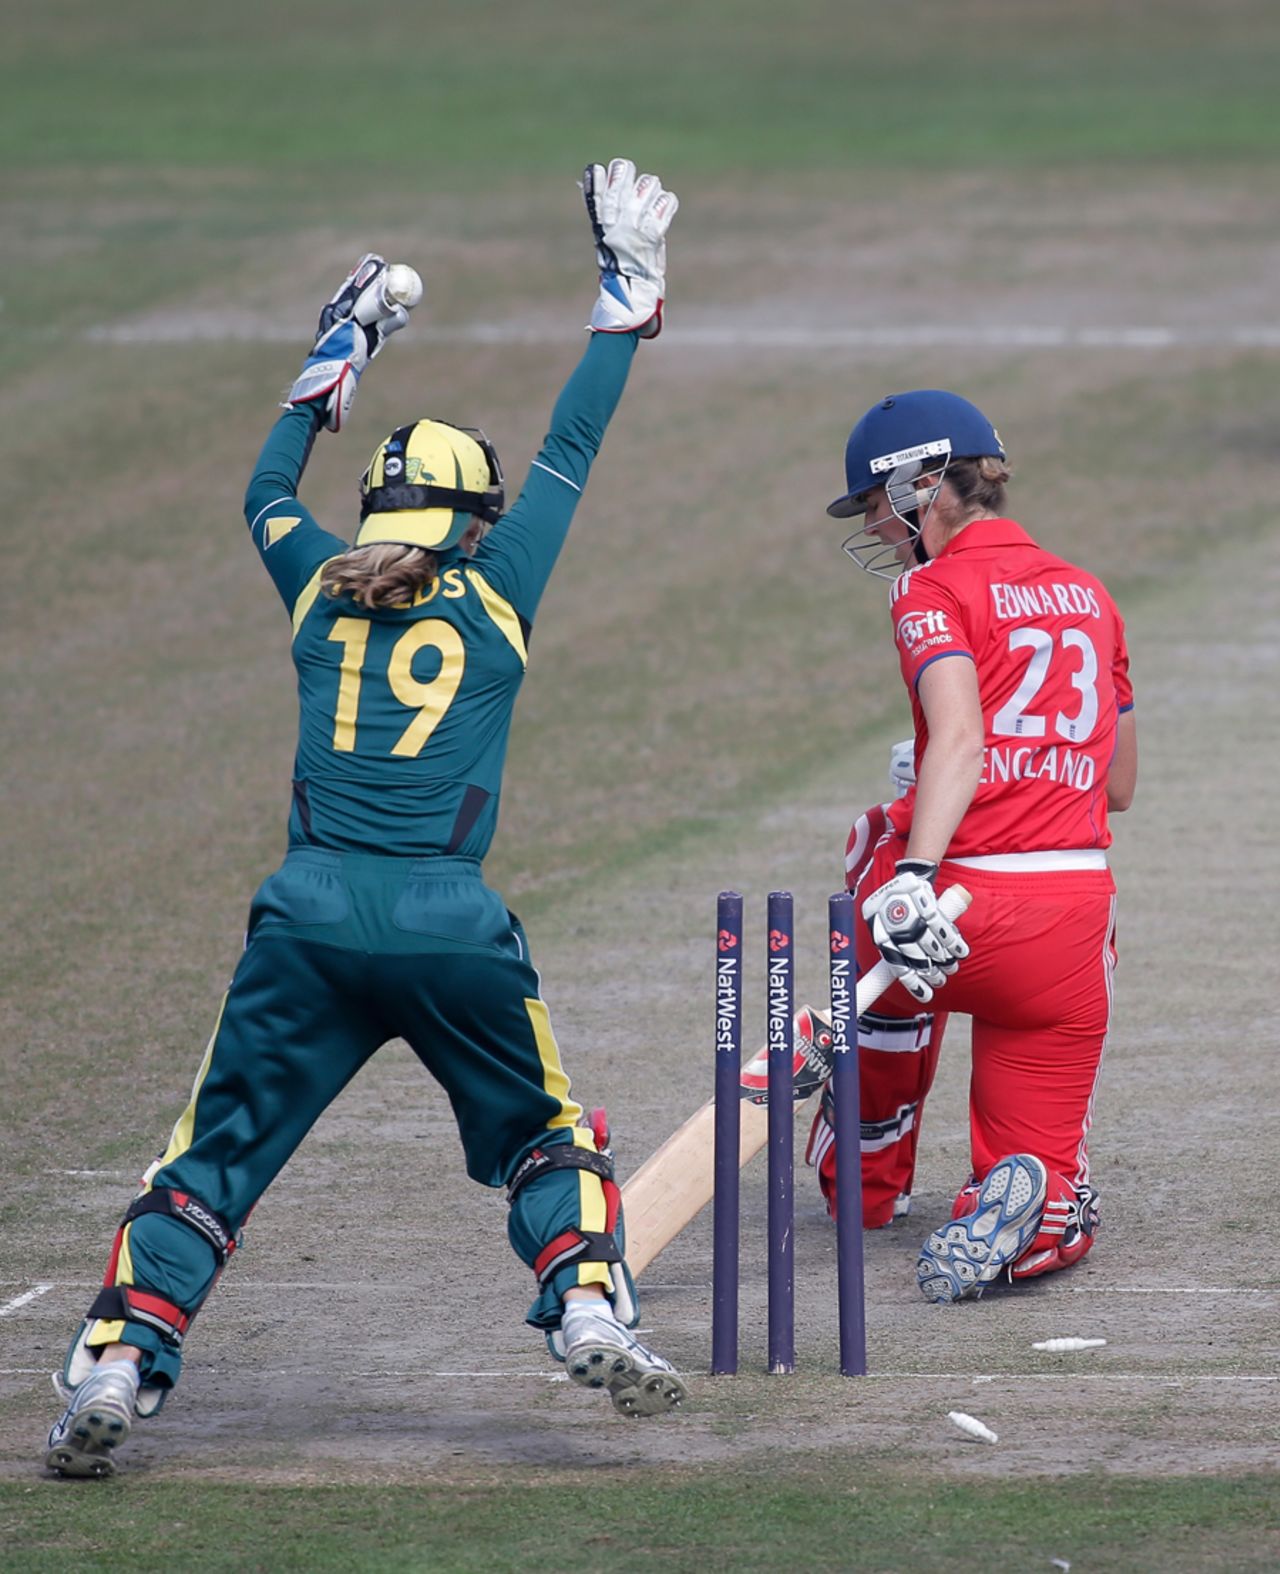 Charlotte Edwards was bowled after completing a half-century, England v Australia, 2nd women's ODI, Hove, August 23, 2013